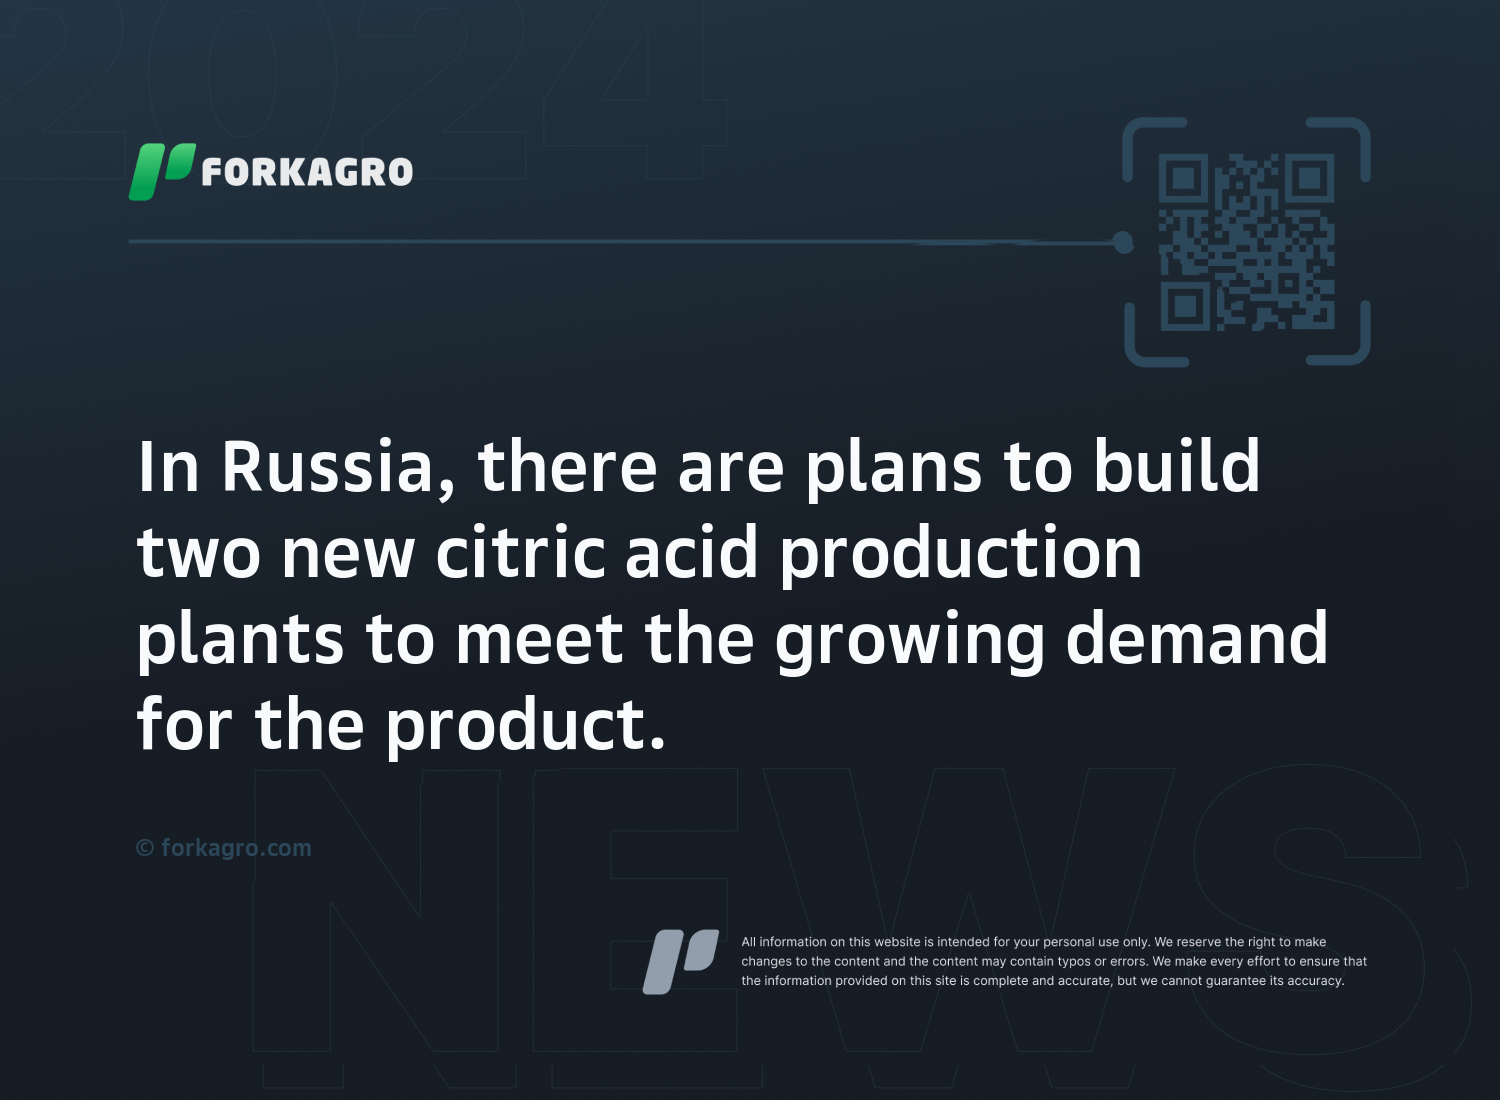 In Russia, there are plans to build two new citric acid production plants to meet the growing demand for the product.